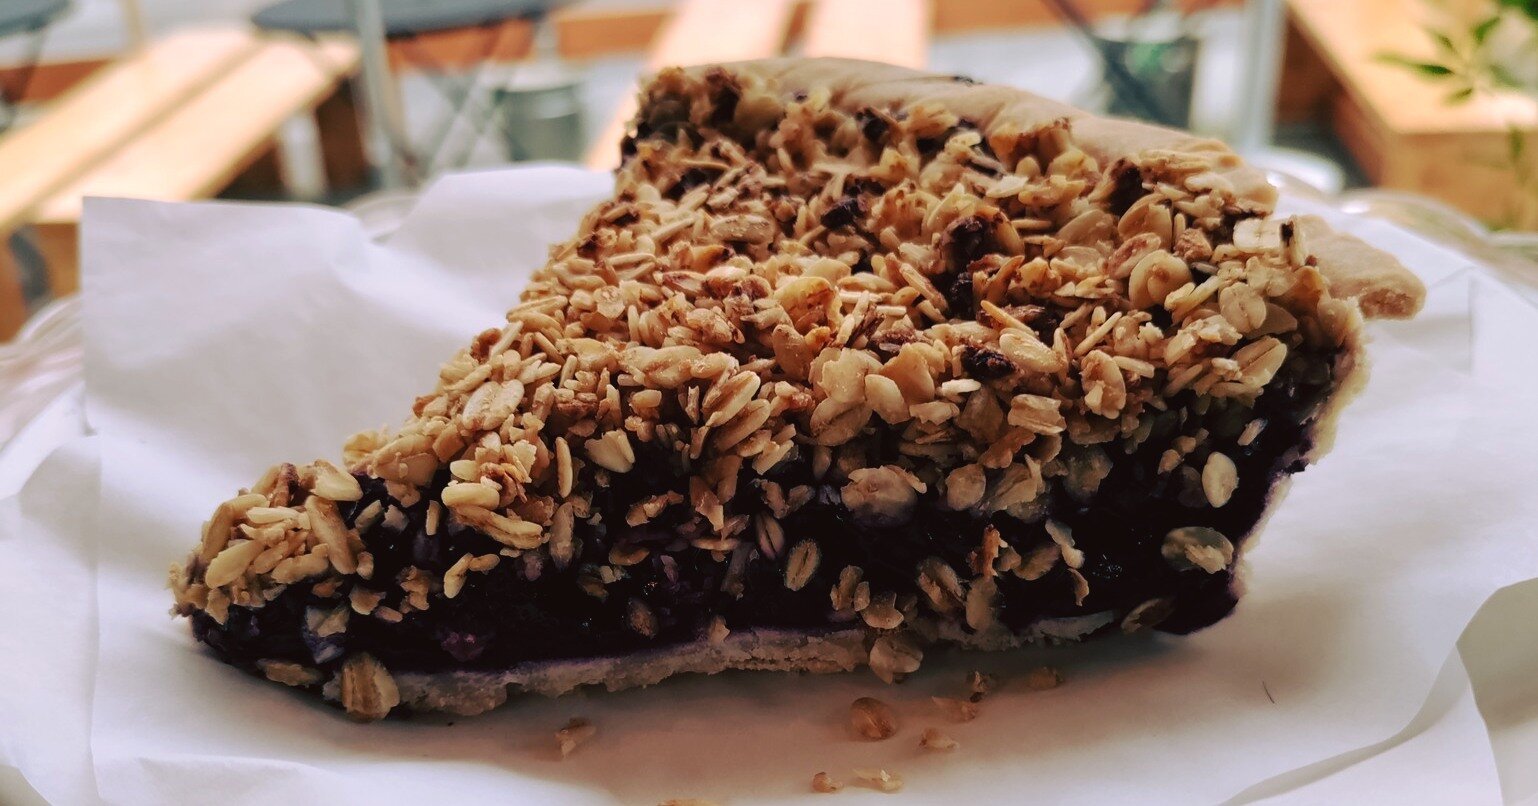 Housmade Organic blueberry crumble PIE  lightly sweetened with dried coconut sap.vegan and gluten-free! Earn discounts at our self-ordering kiosks or skip the line Order online www.purekitchenandjuicery.com or delivery @vashoneats #TreatYourself #Veg